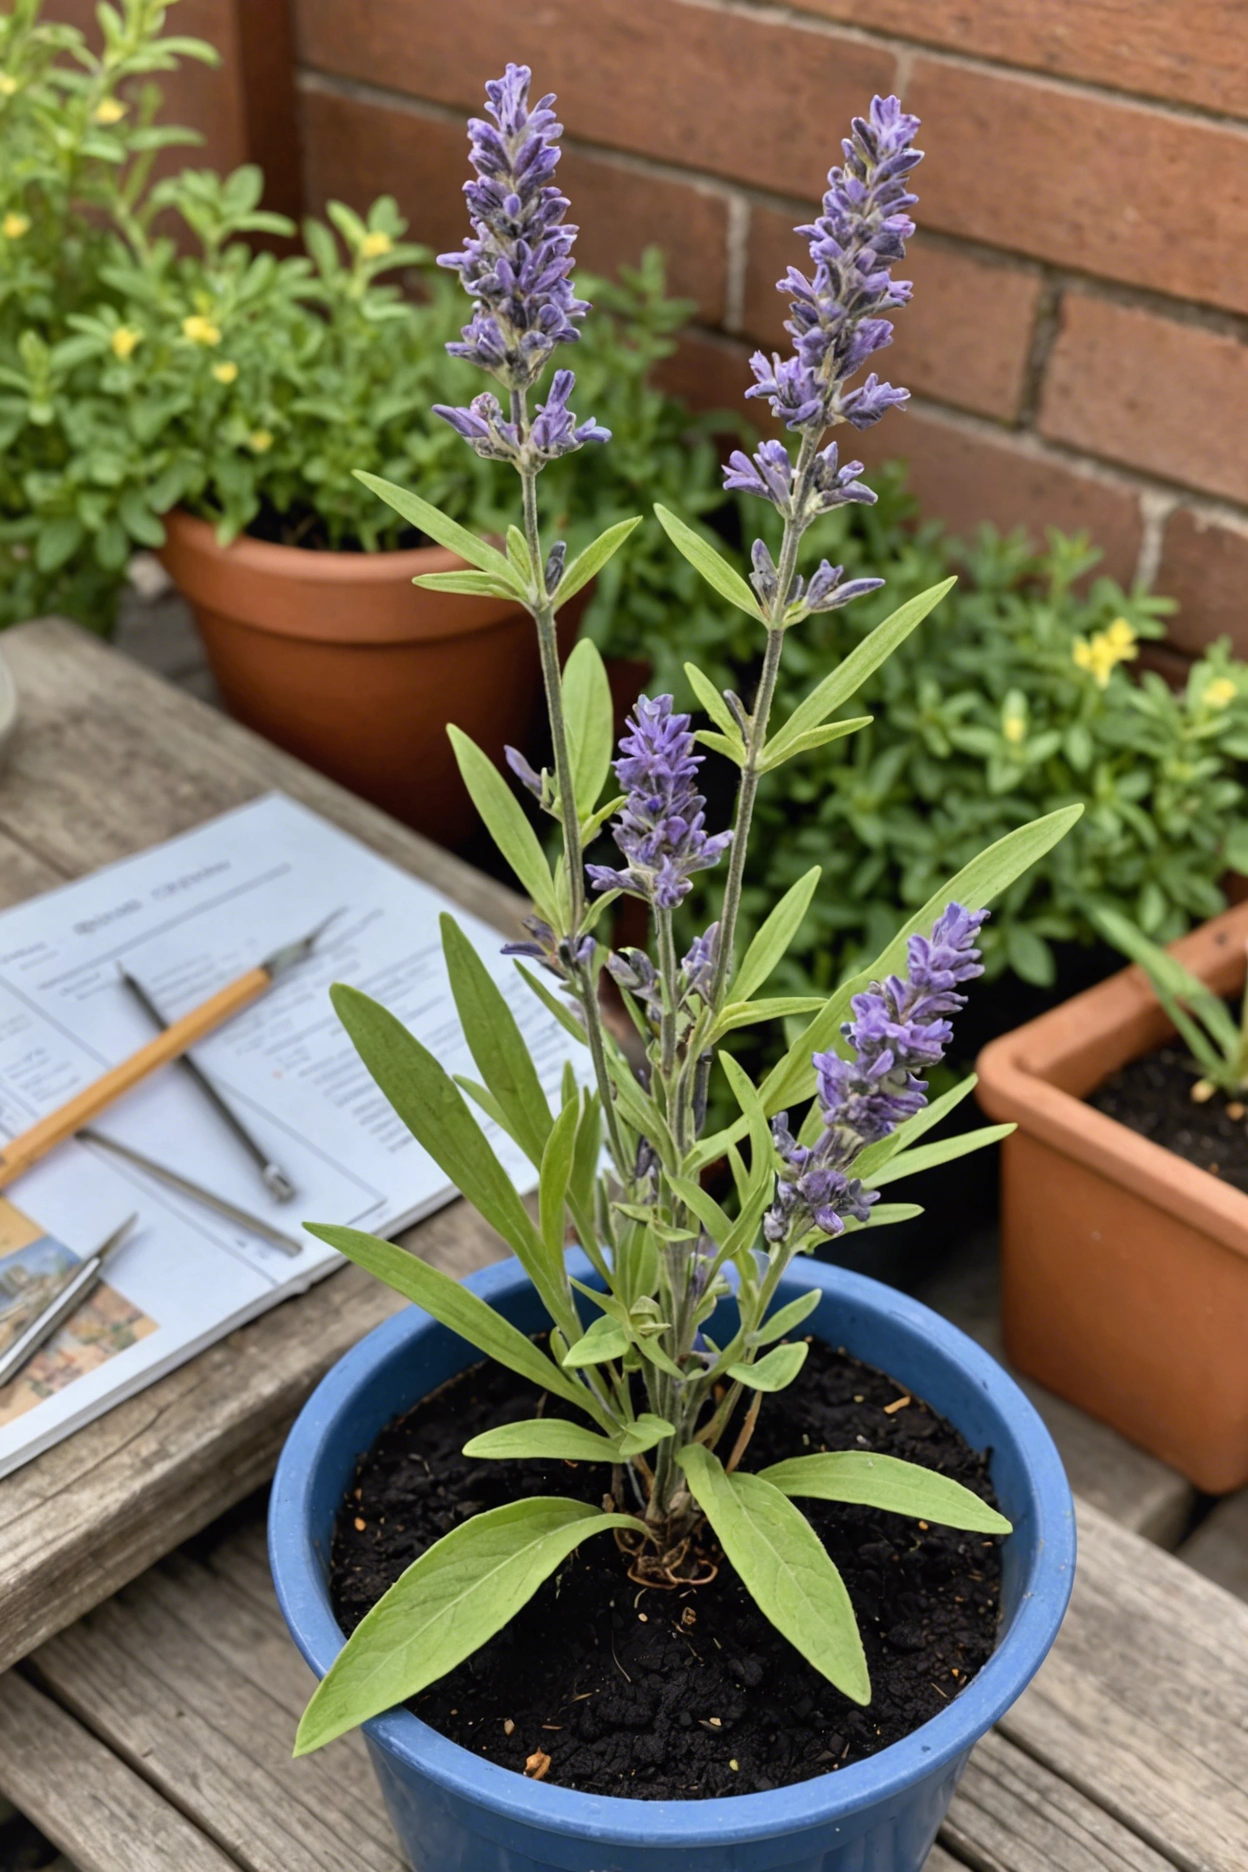 "Wilting lavender plant in a pot on an outdoor table, surrounded by gardening tools, a soil testing kit, and a care guide book."